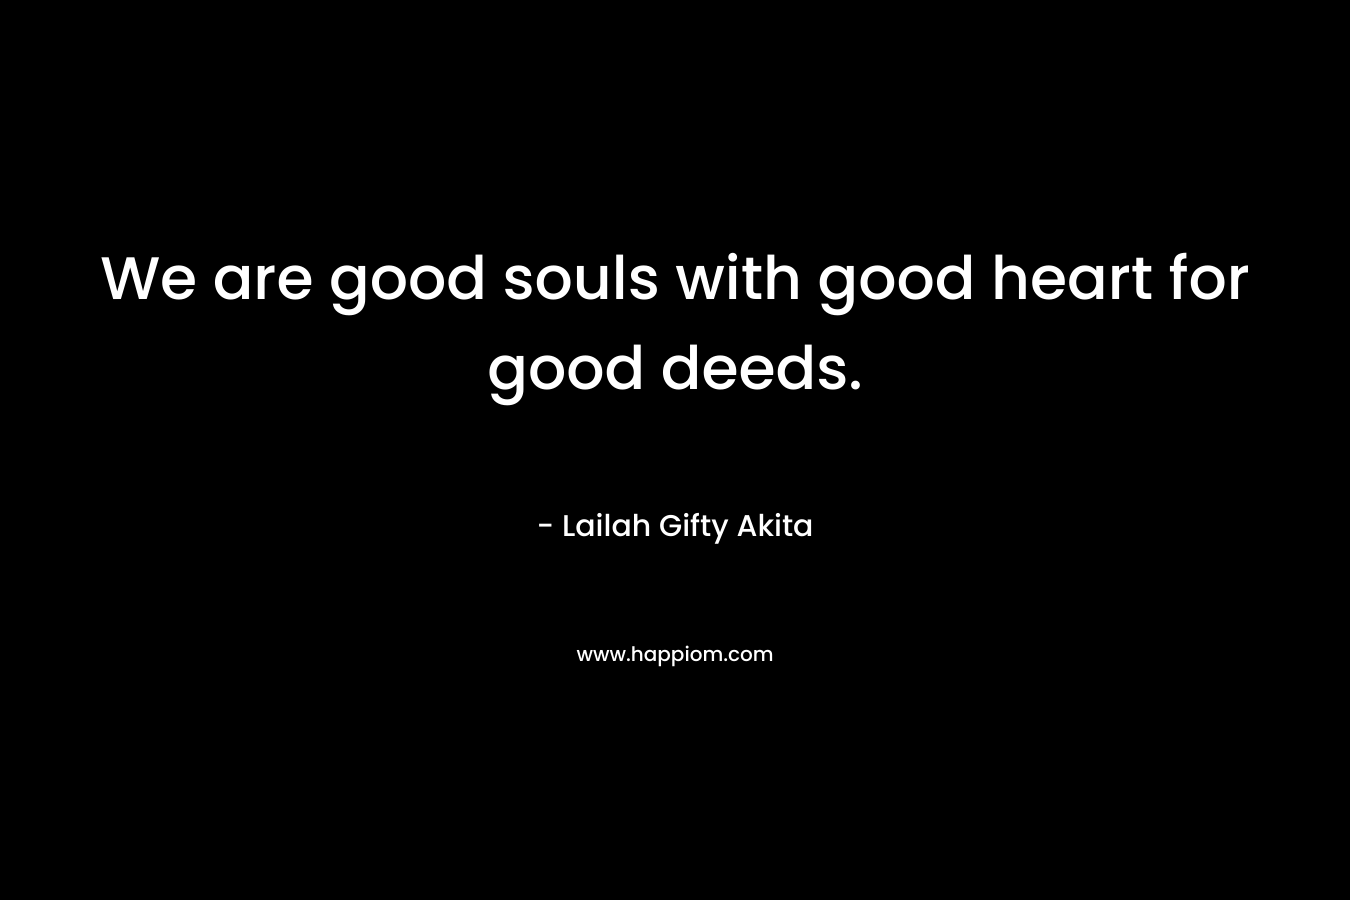 We are good souls with good heart for good deeds.